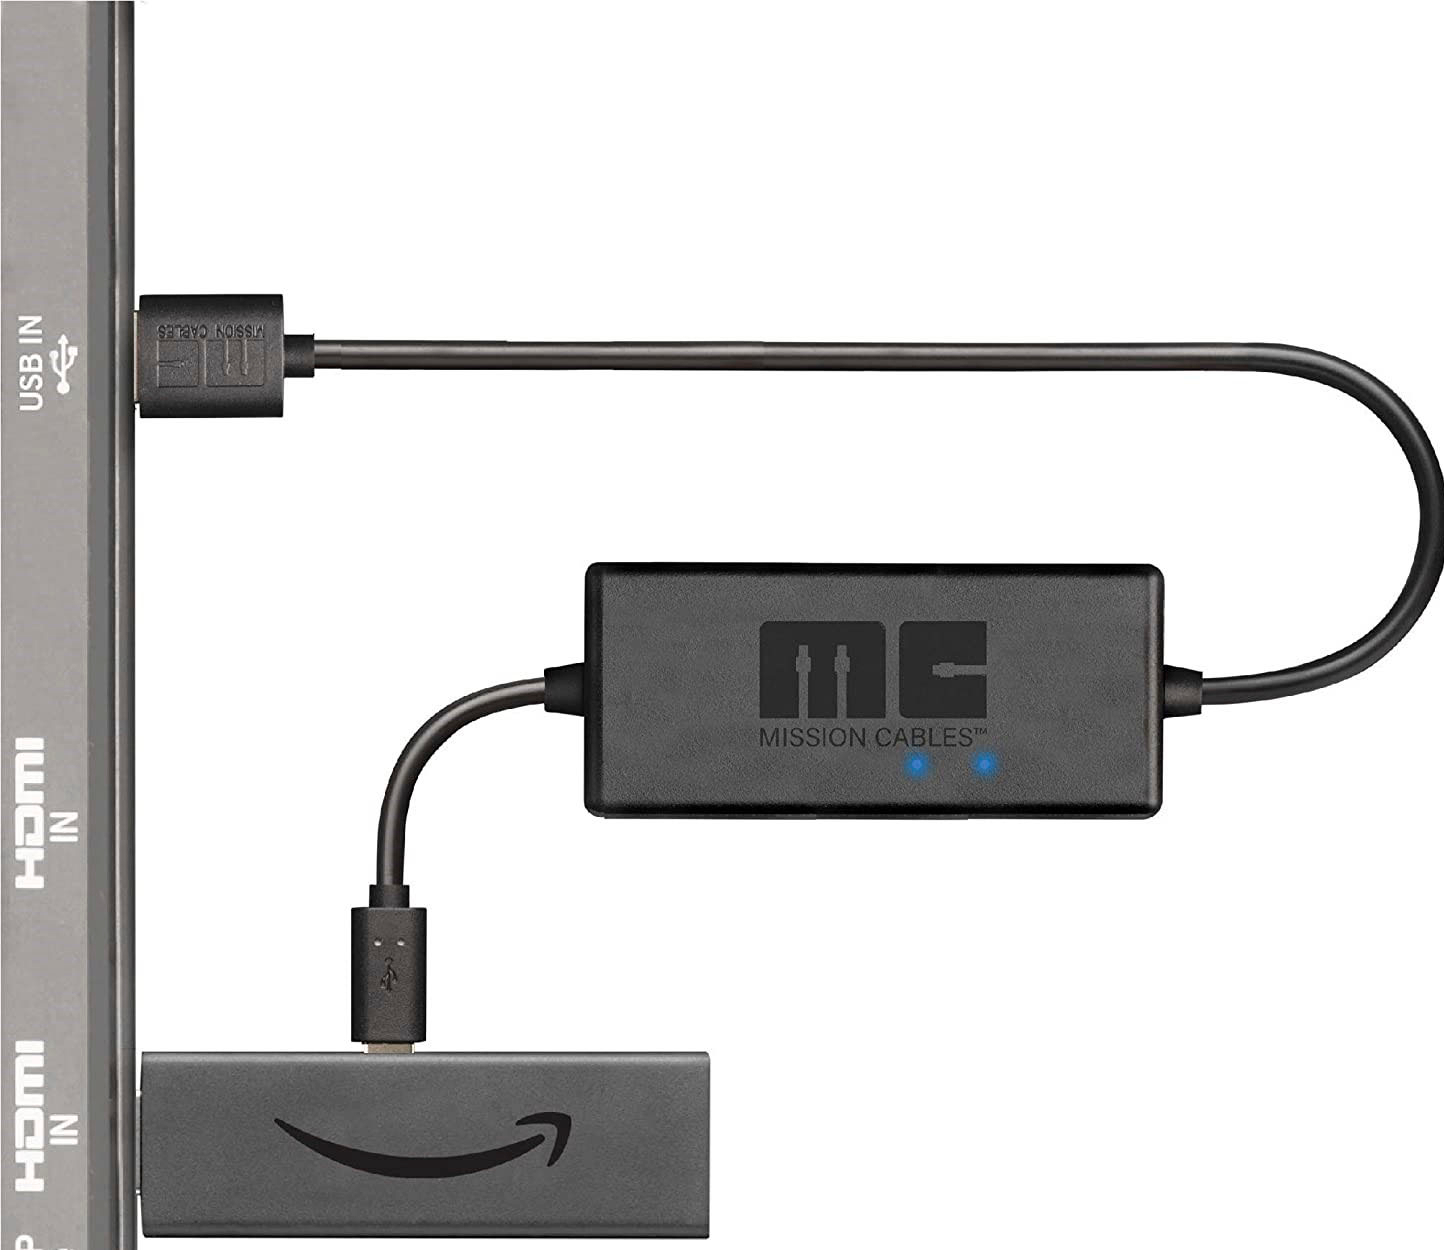  OTG Cable for Fire TV Stick 4K Lite Max Cube, USB